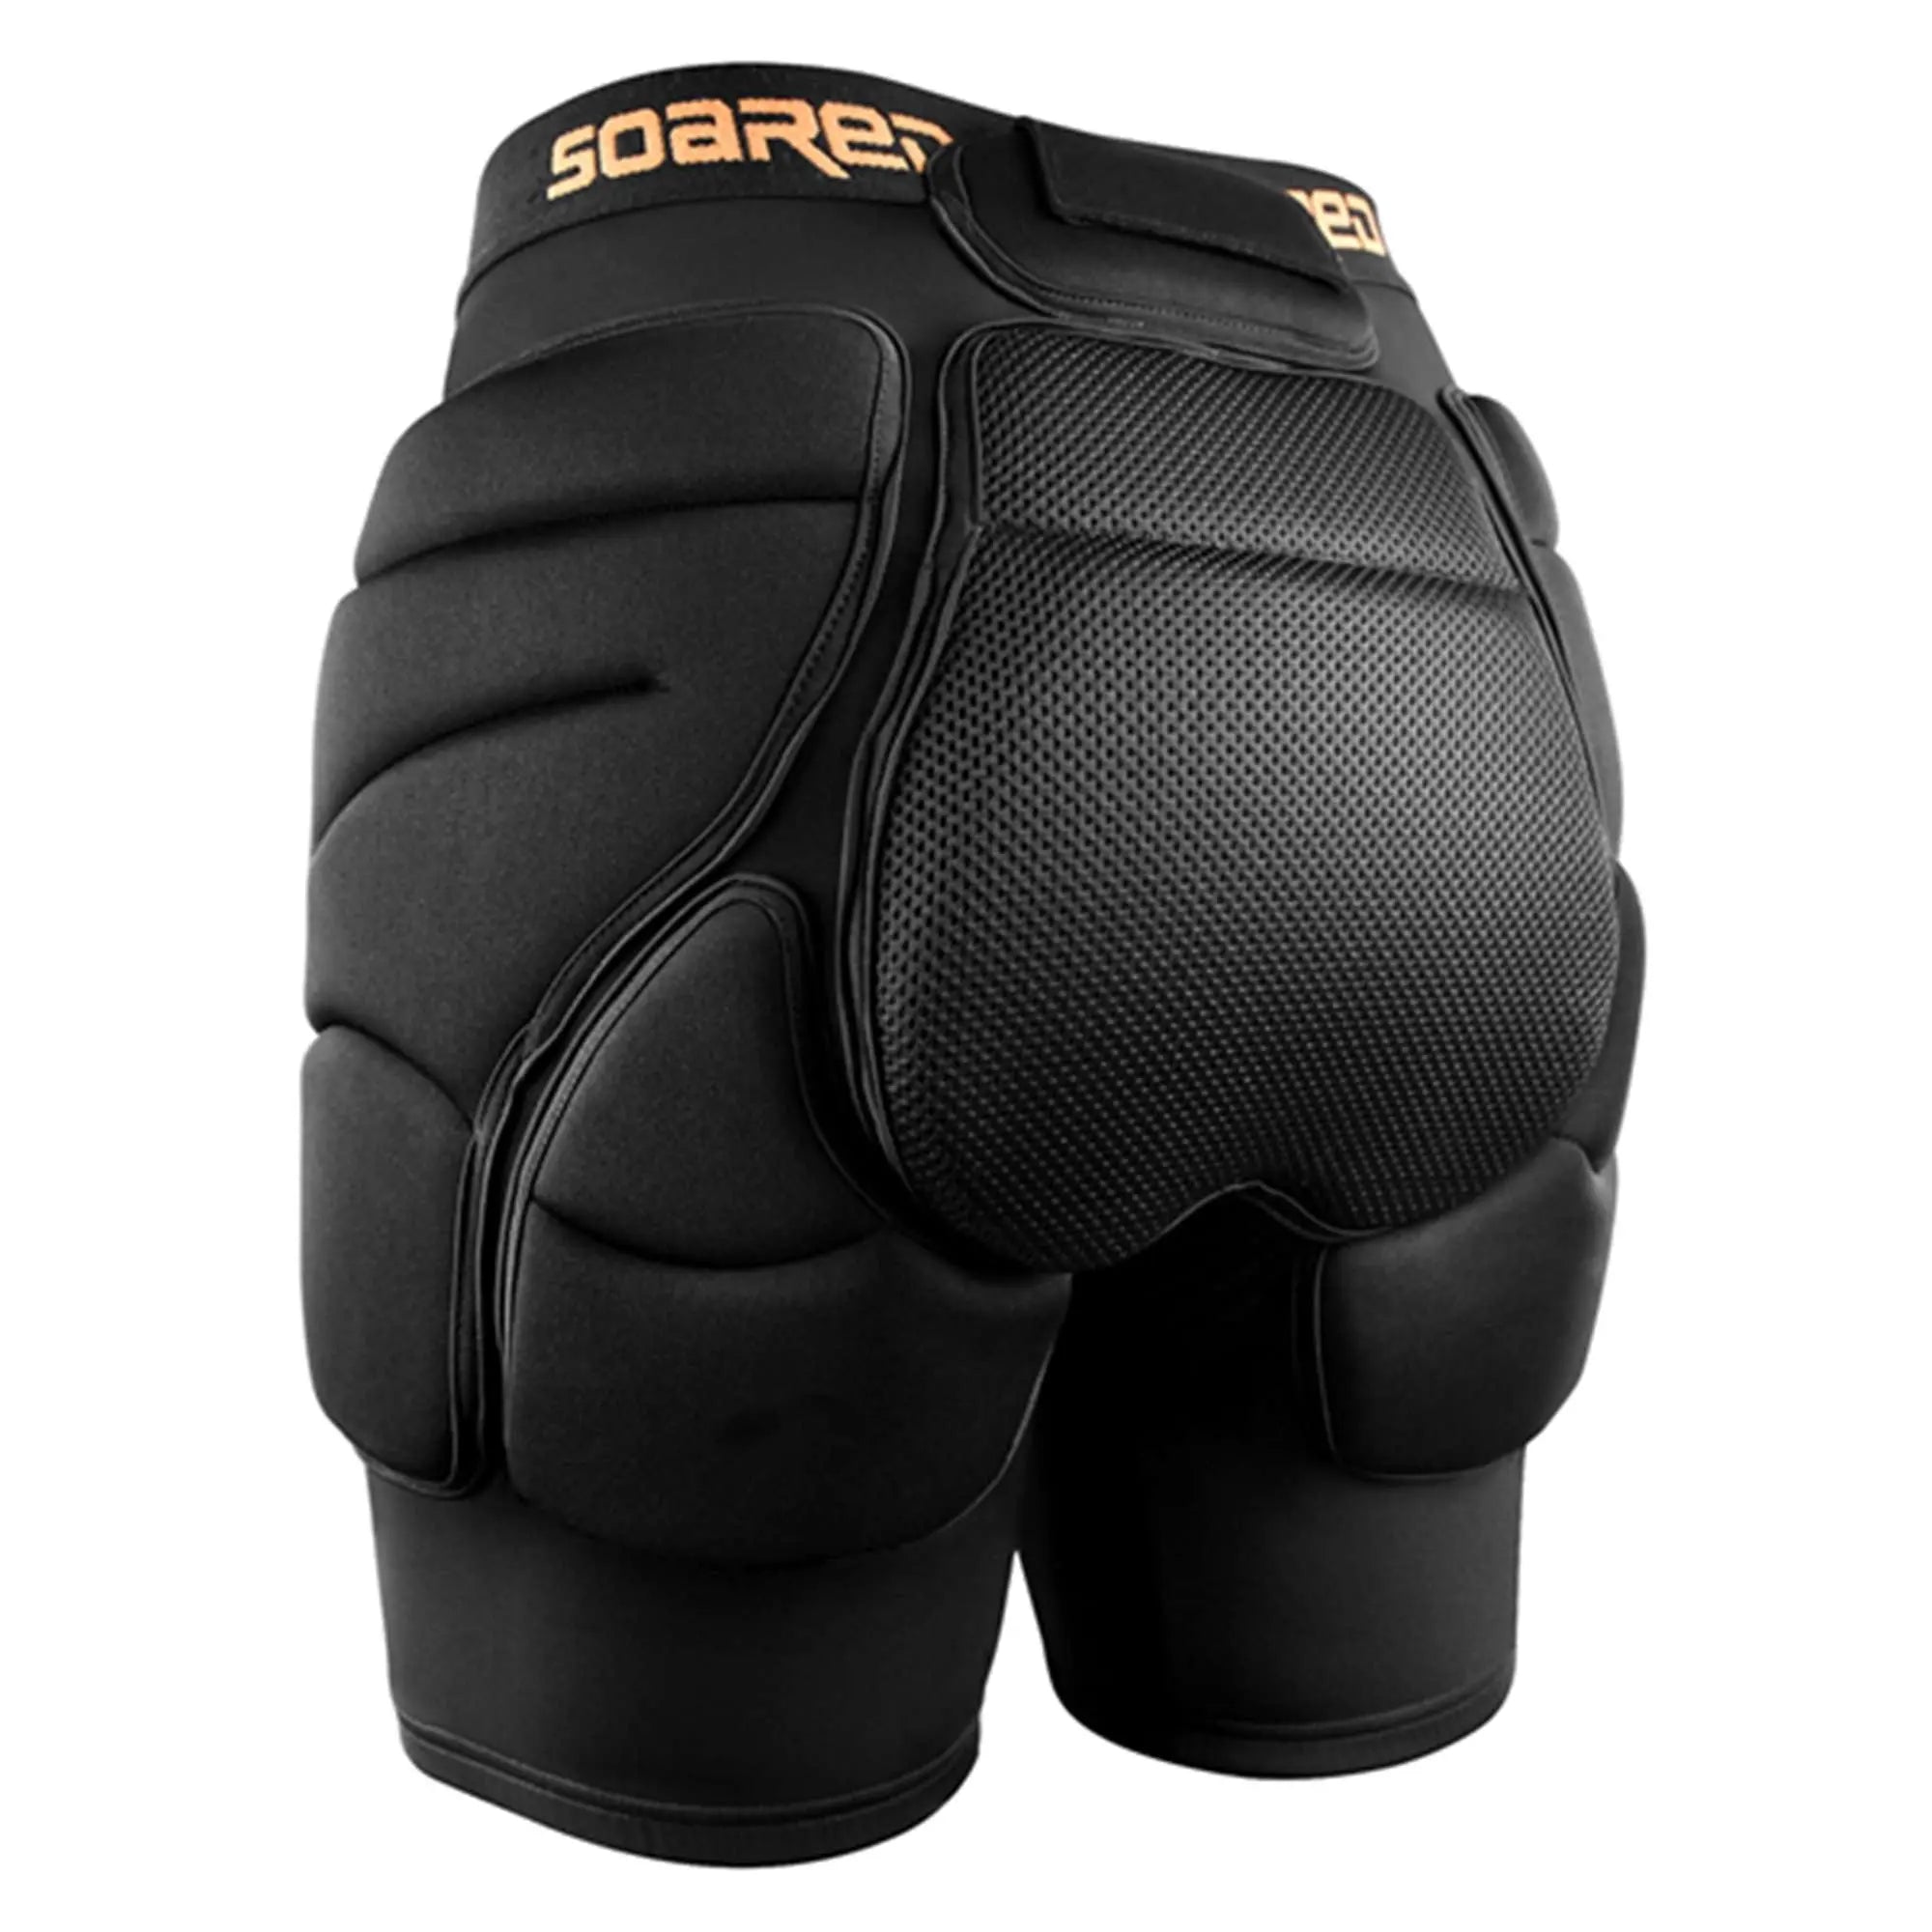 Development of hip protectors for snowboarding utilizing 3D modeling and 3D  printing, Fashion and Textiles